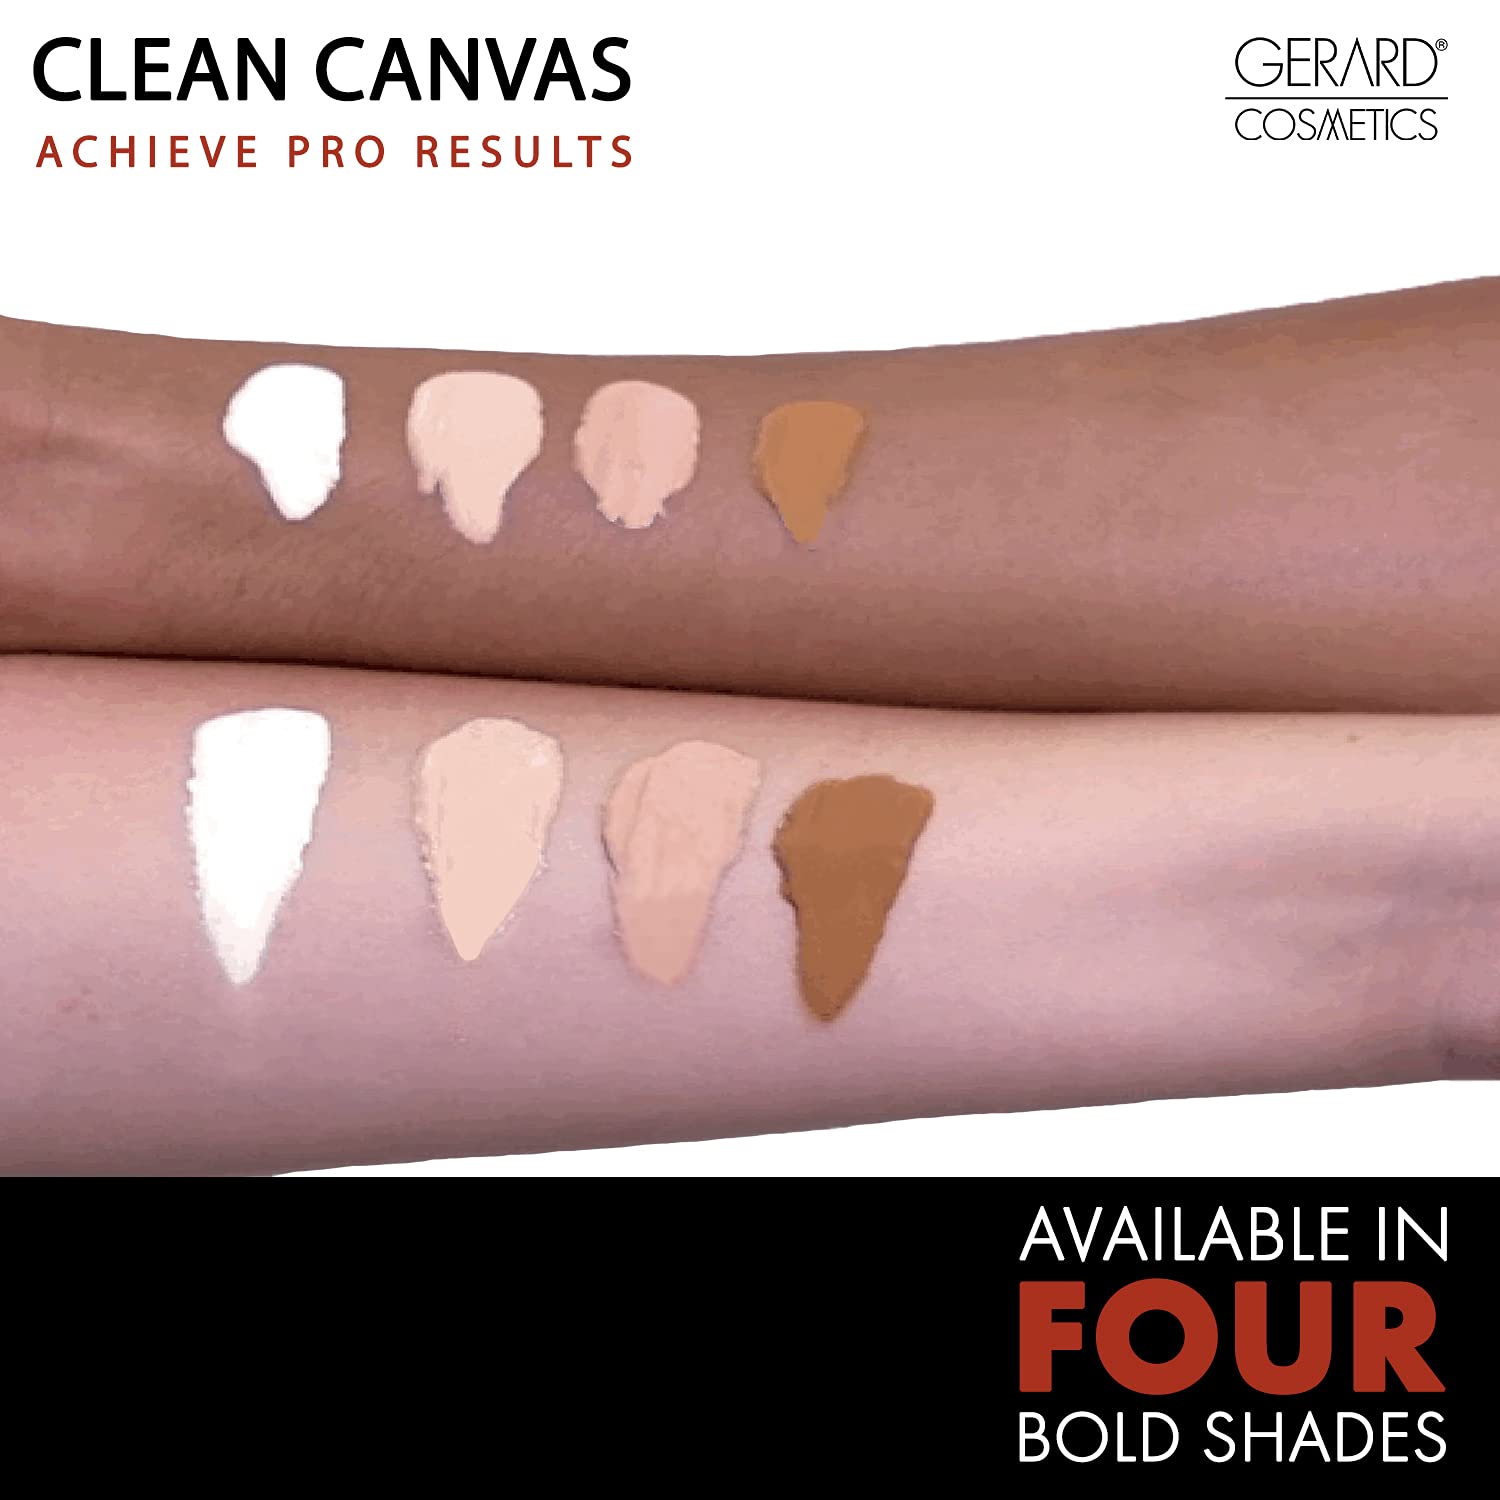 Gerard Cosmetics Clean Canvas Eye Concealer and Base - Smoothens Under Eye and Covers Blemishes - Extends Duration of Eyeshadow Wear - Evens Complexion - Keeps Makeup Color True - Fair - 0.14 oz